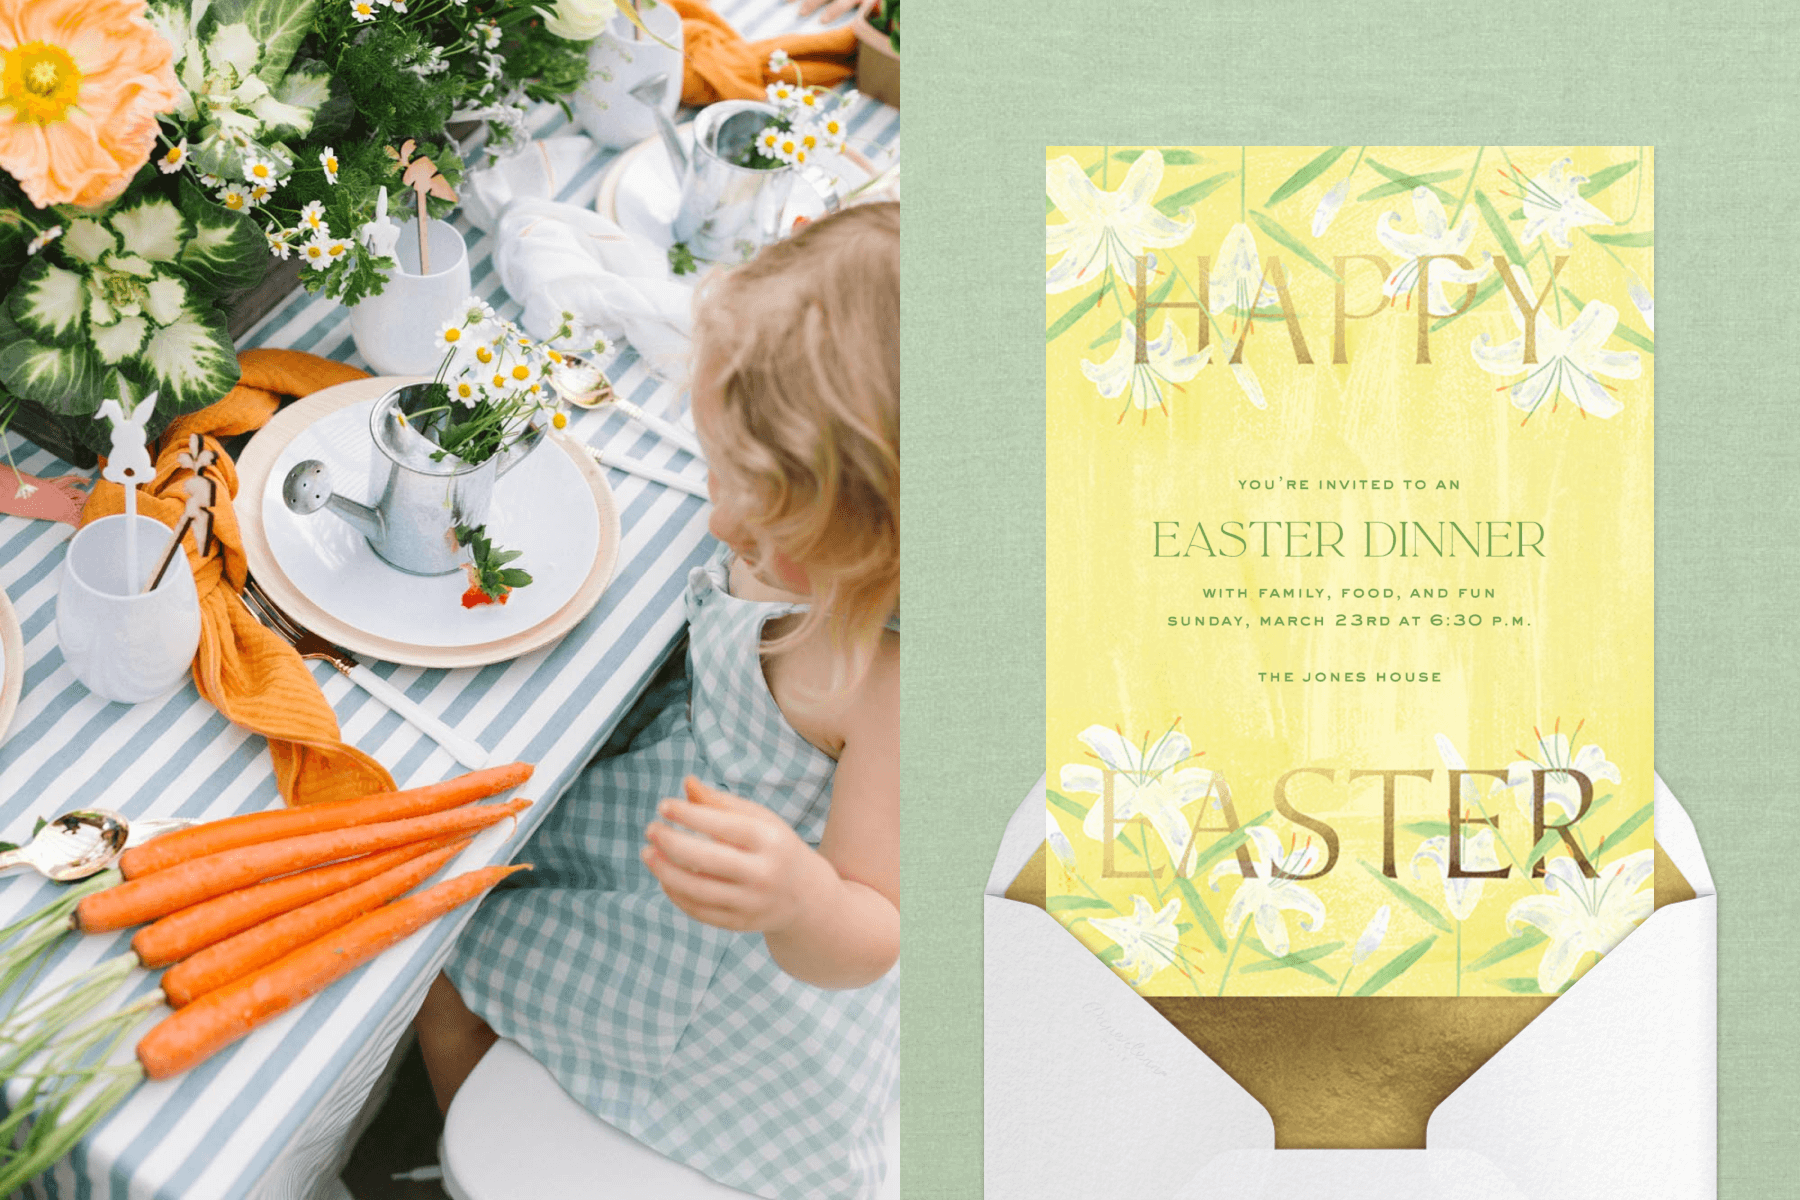 Left: A toddler sits at an Easter table with carrots, flowers, and watering can; A yellow Easter invitation with lilies and the words “Happy Easter.”